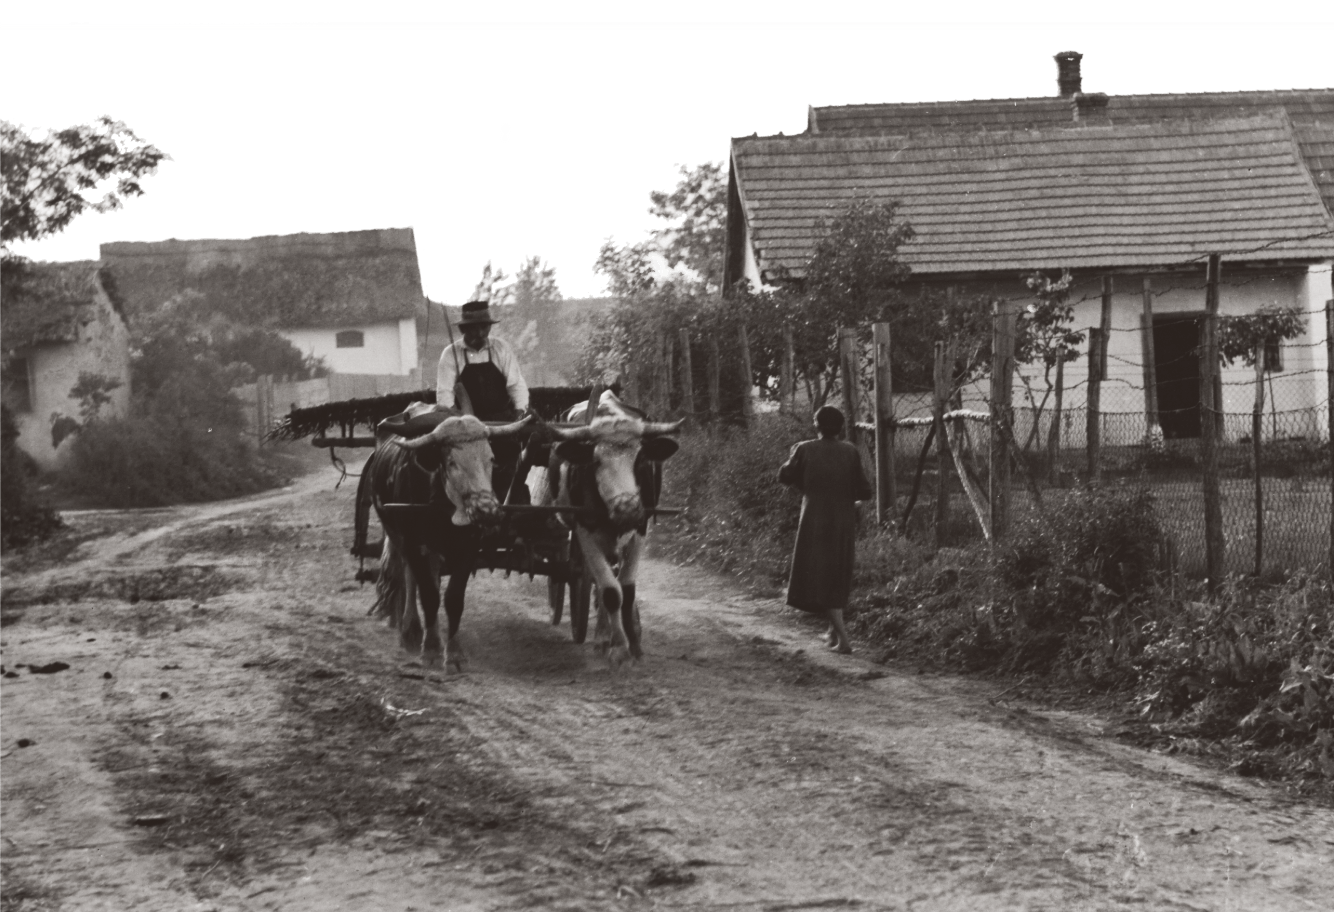 Cattle wagon on country road in 1930s Hungary